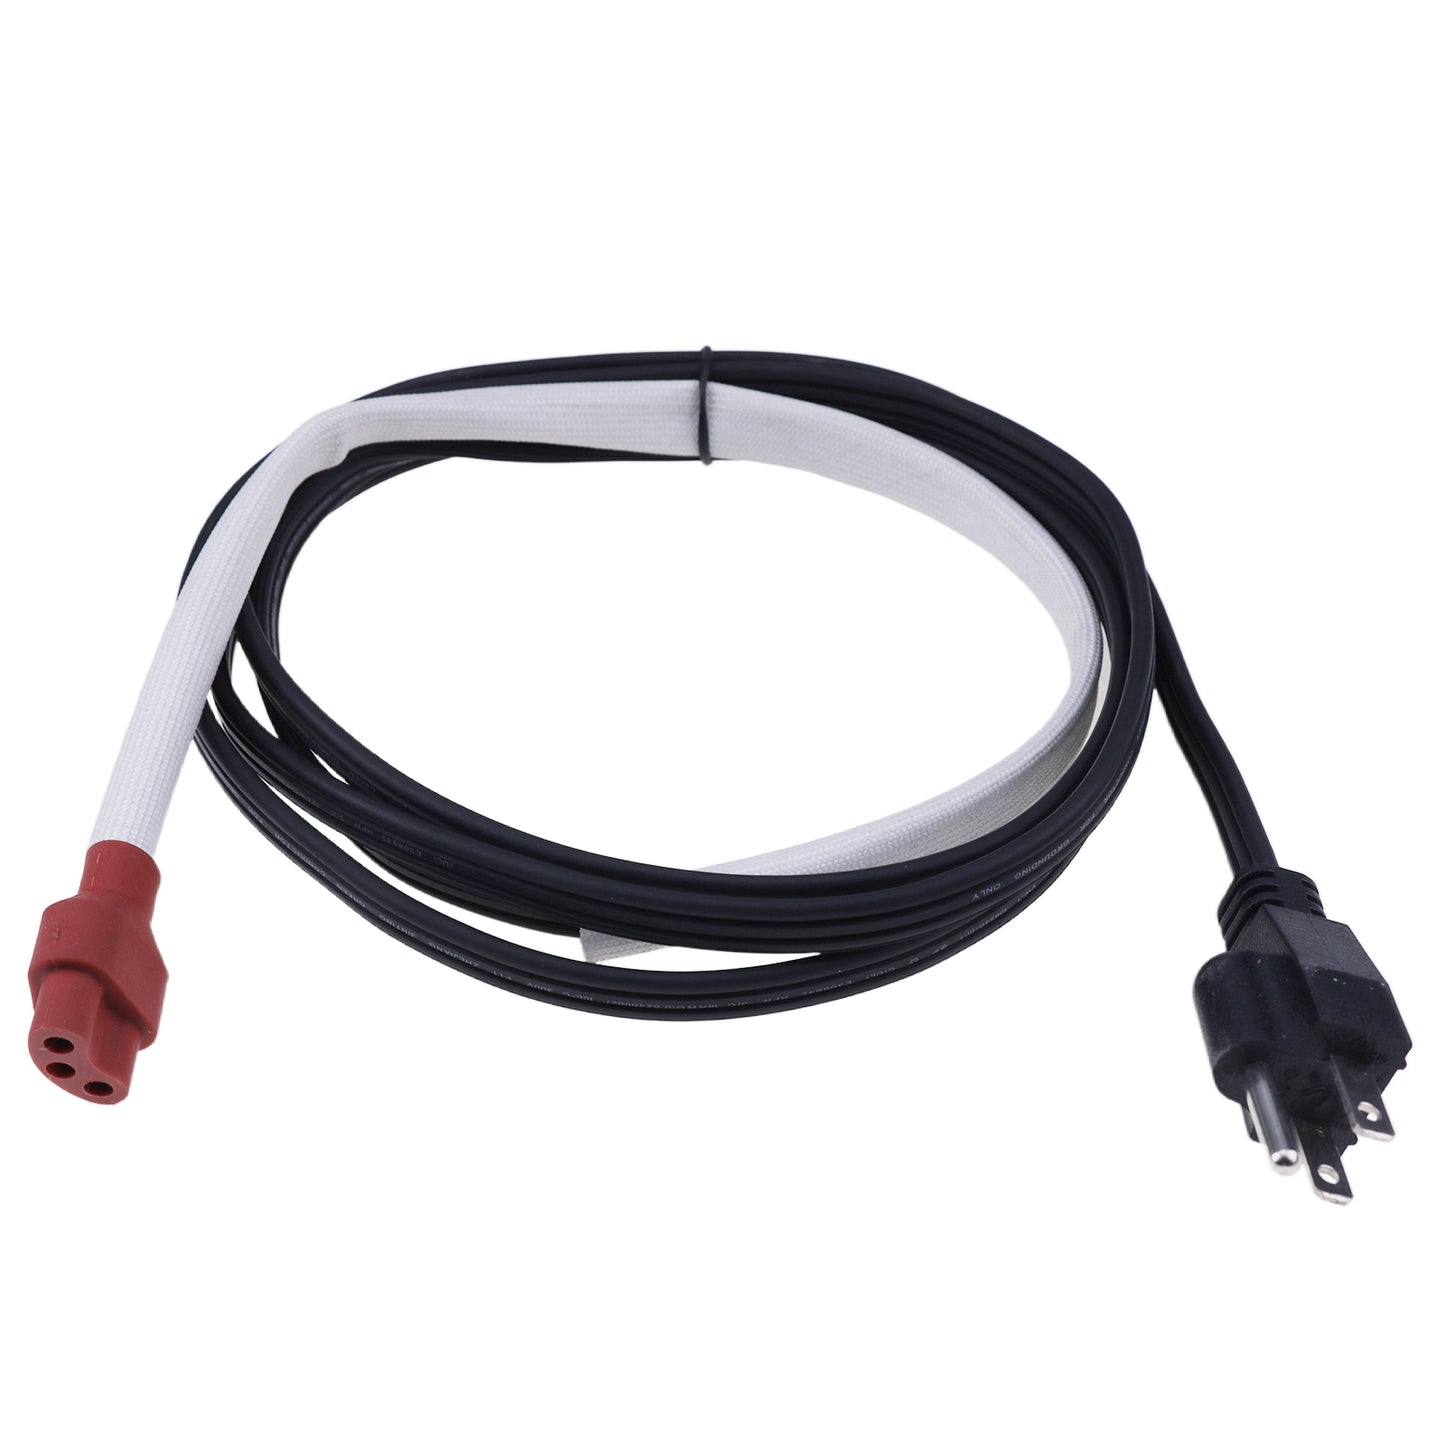 New 120V 5 Feet Block Heater Cord 3600006 Compatible with Transmission Heaters, Freeze Plug, Oil Pan, Engine Block